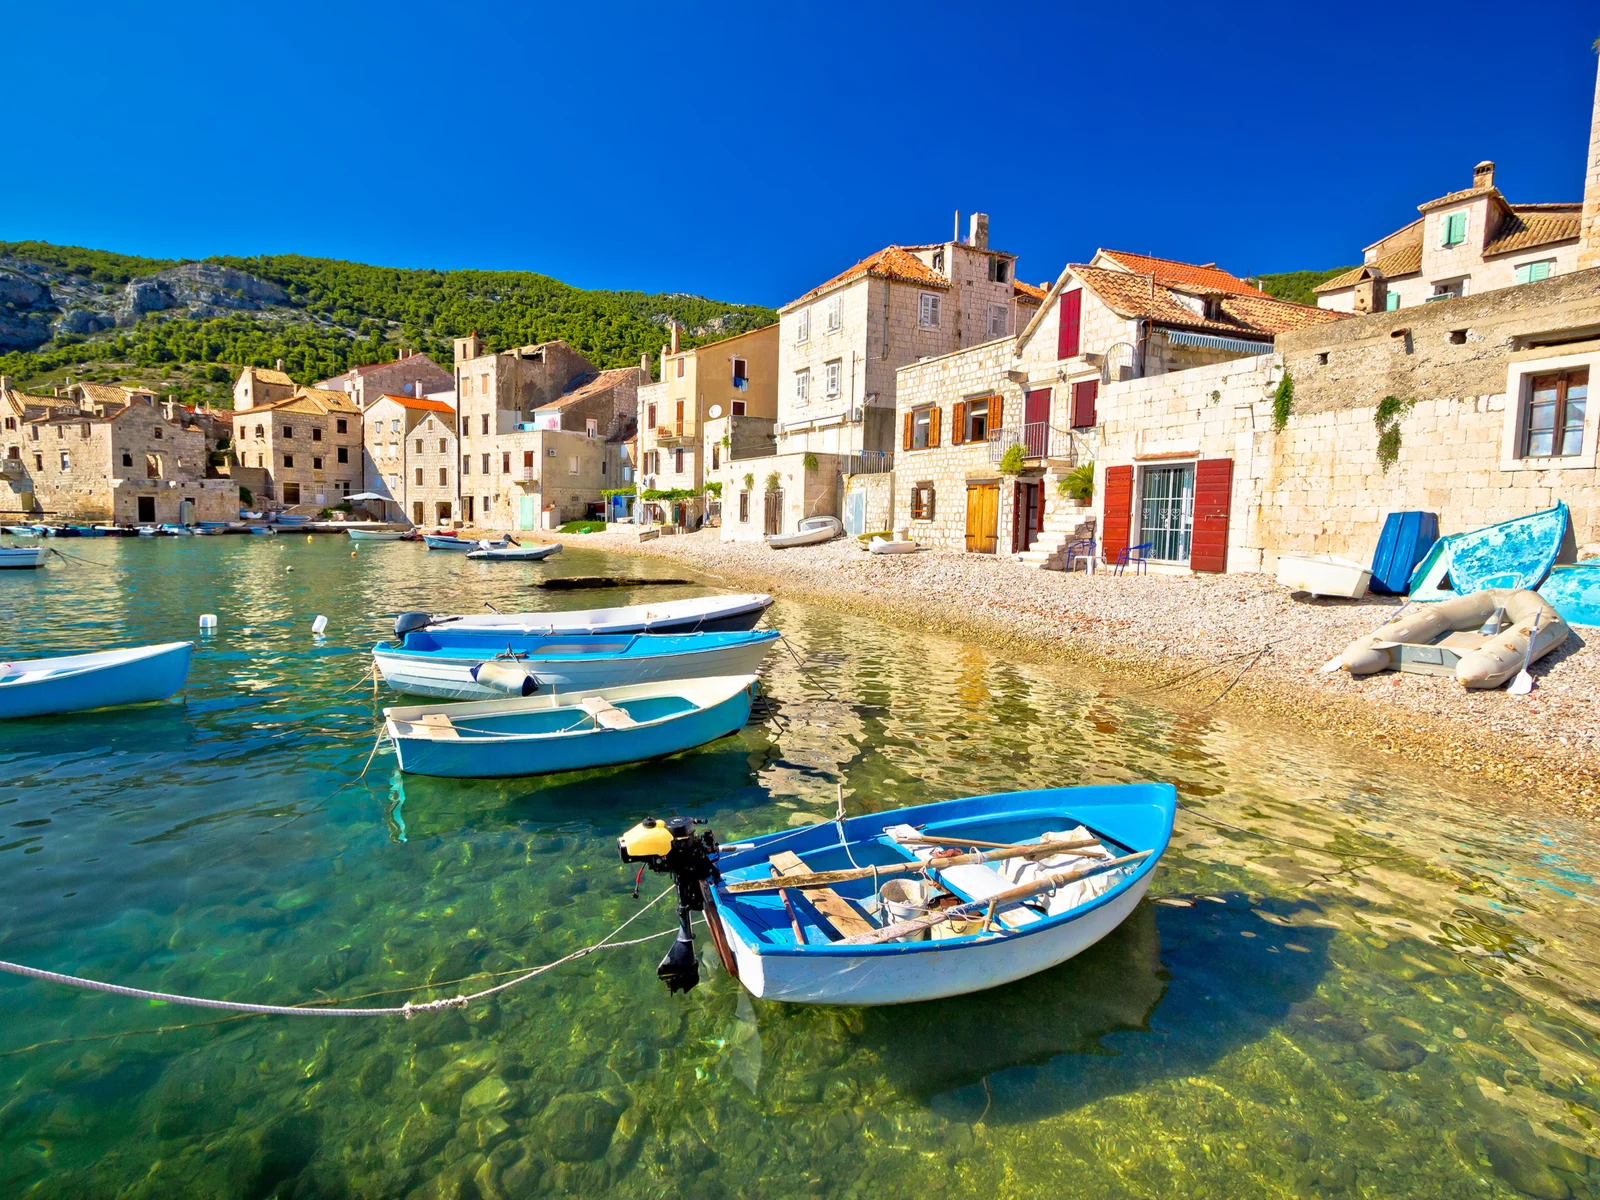 Cool view of boats on a canal in Komiza, one of the best things to do in Croatia